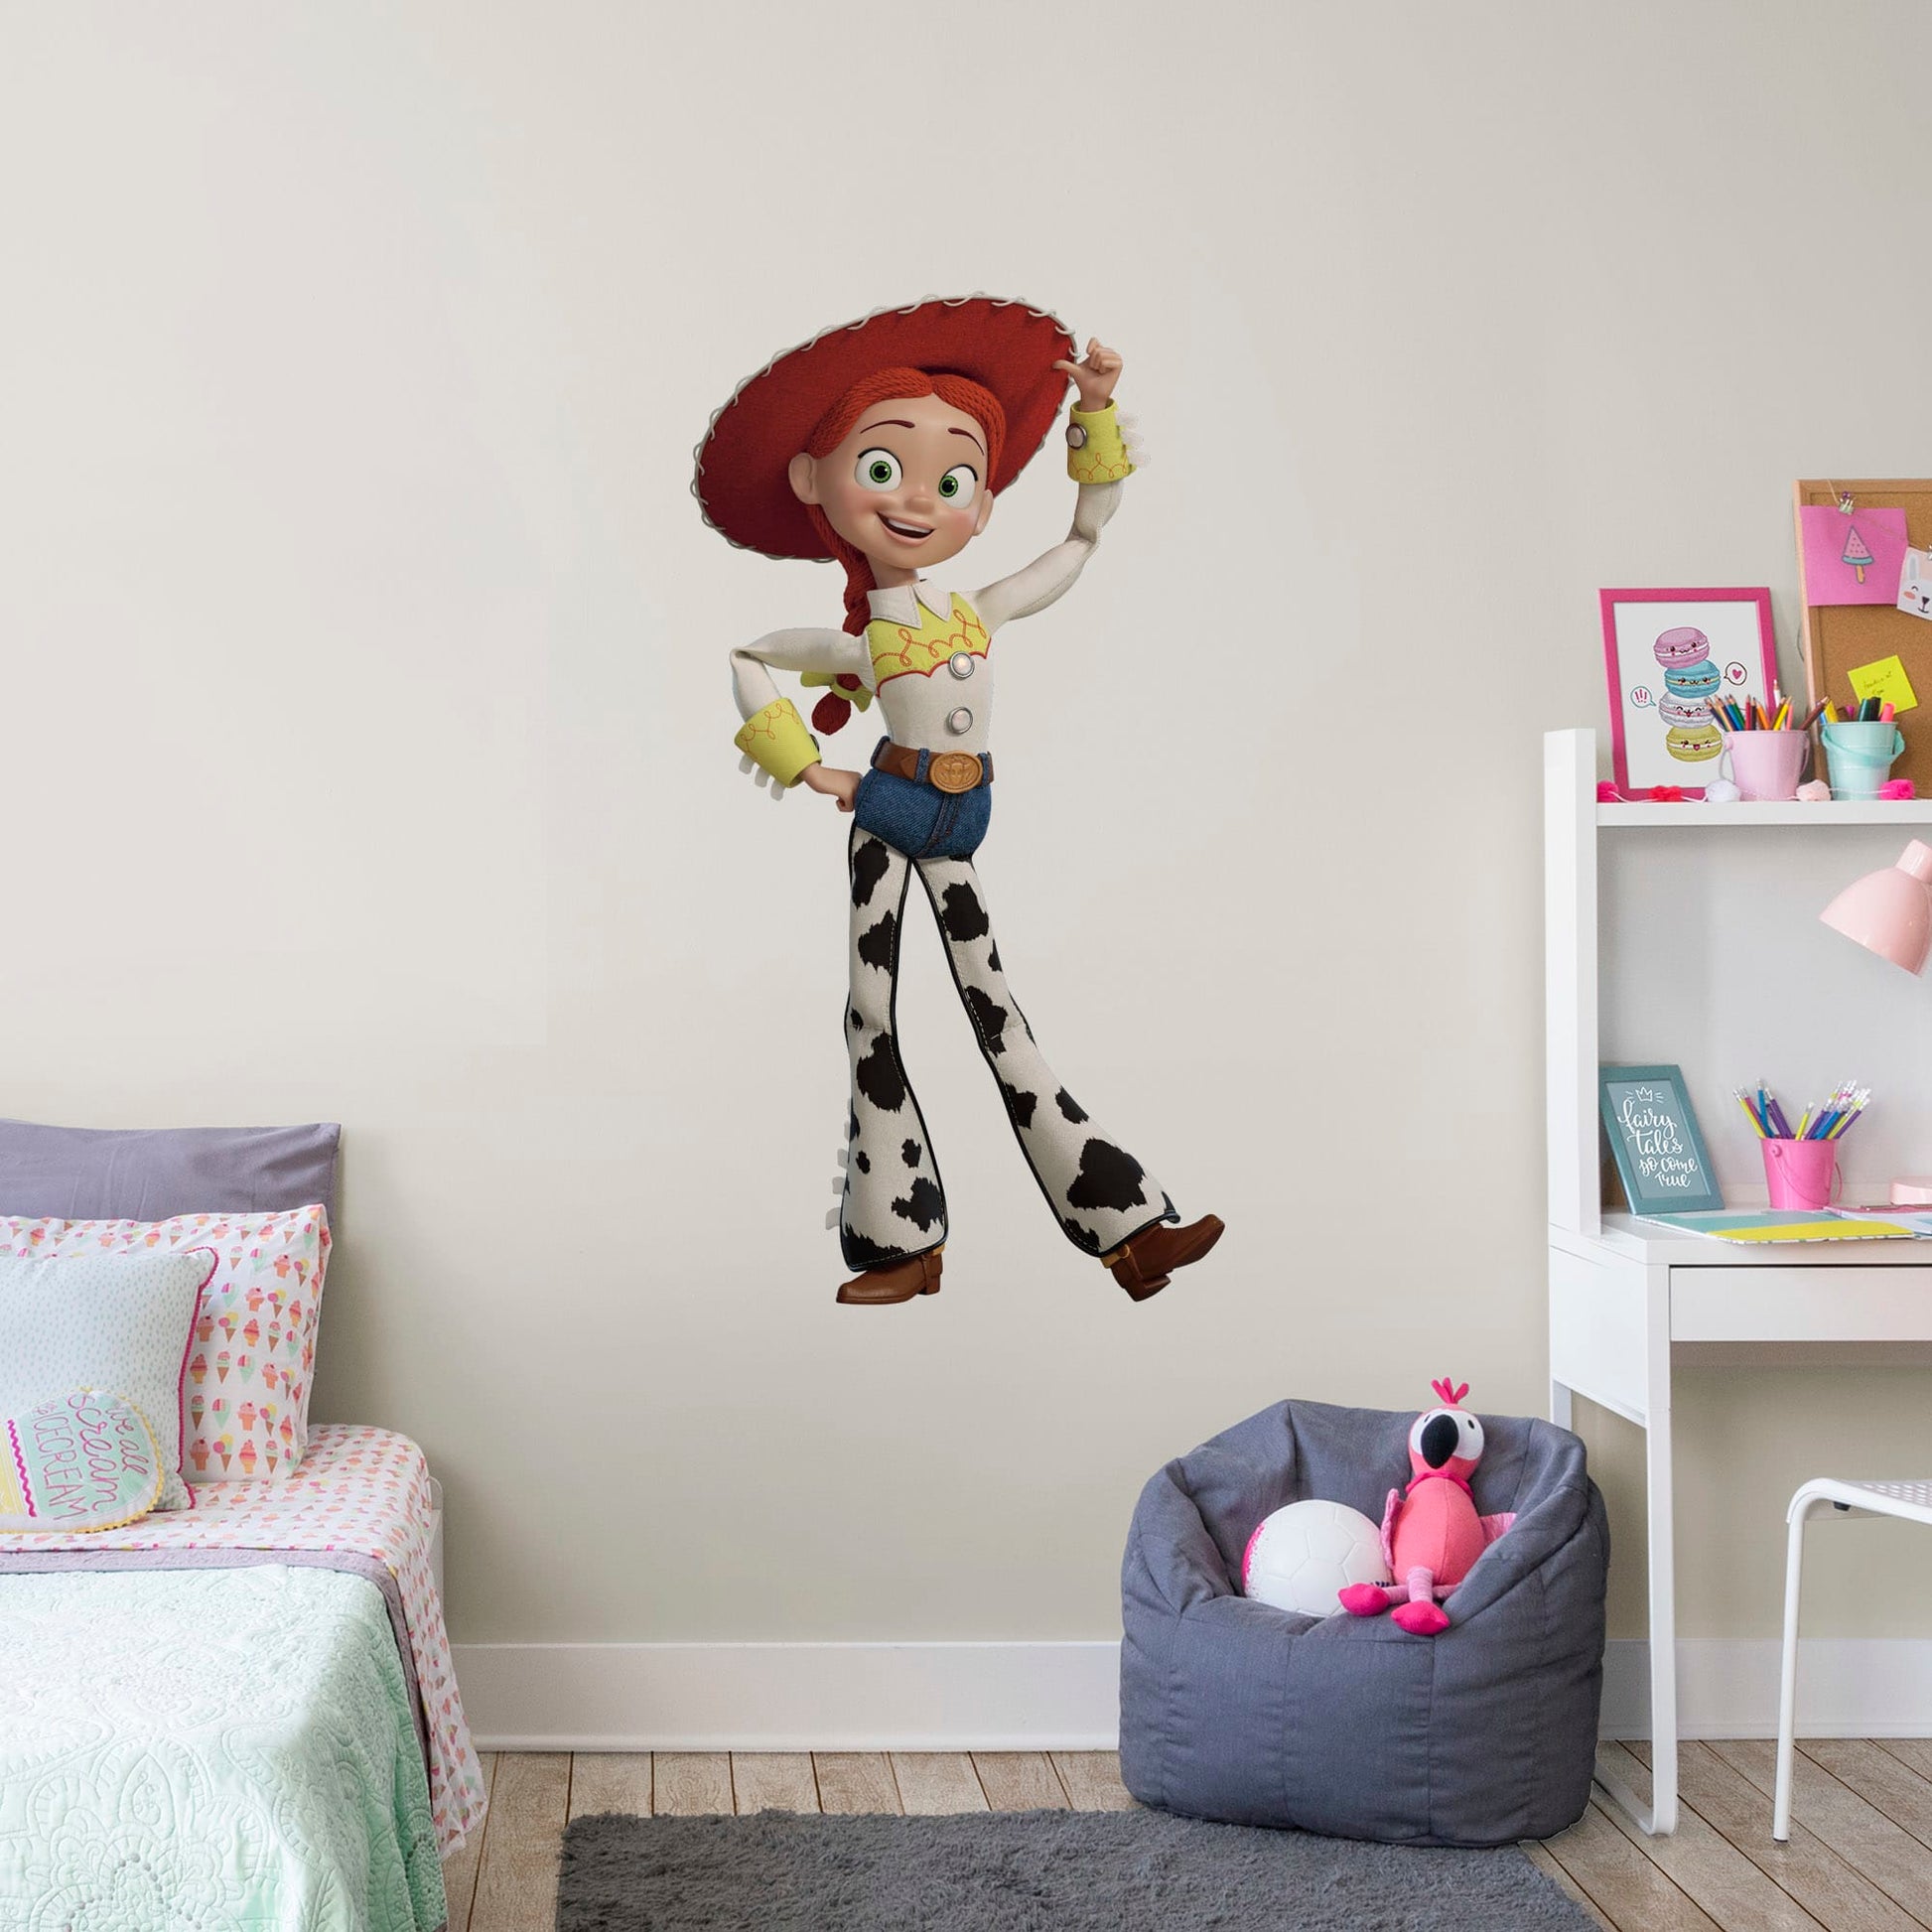 Giant Character + 2 Decals (27"W x 51"H)